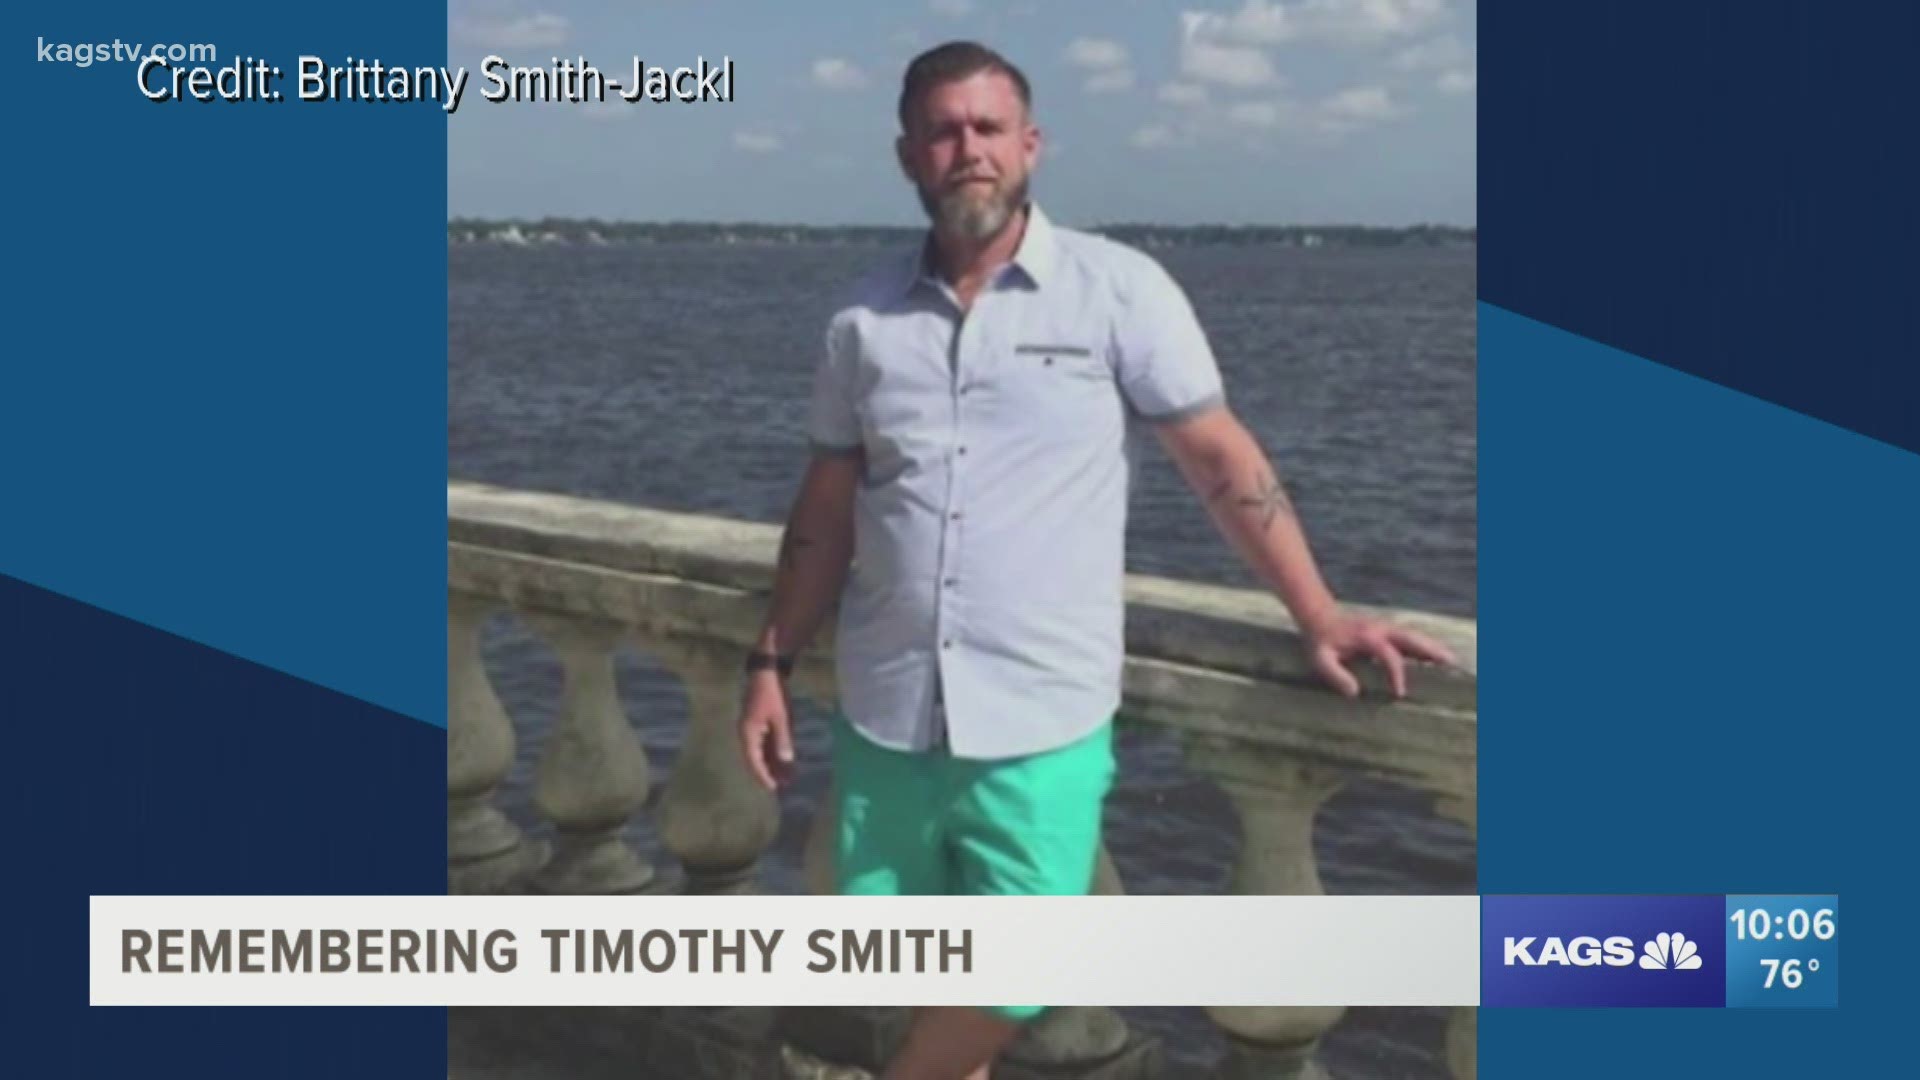 The life of 40-year-old Tim Smith is continuing to be remembered by his friends.